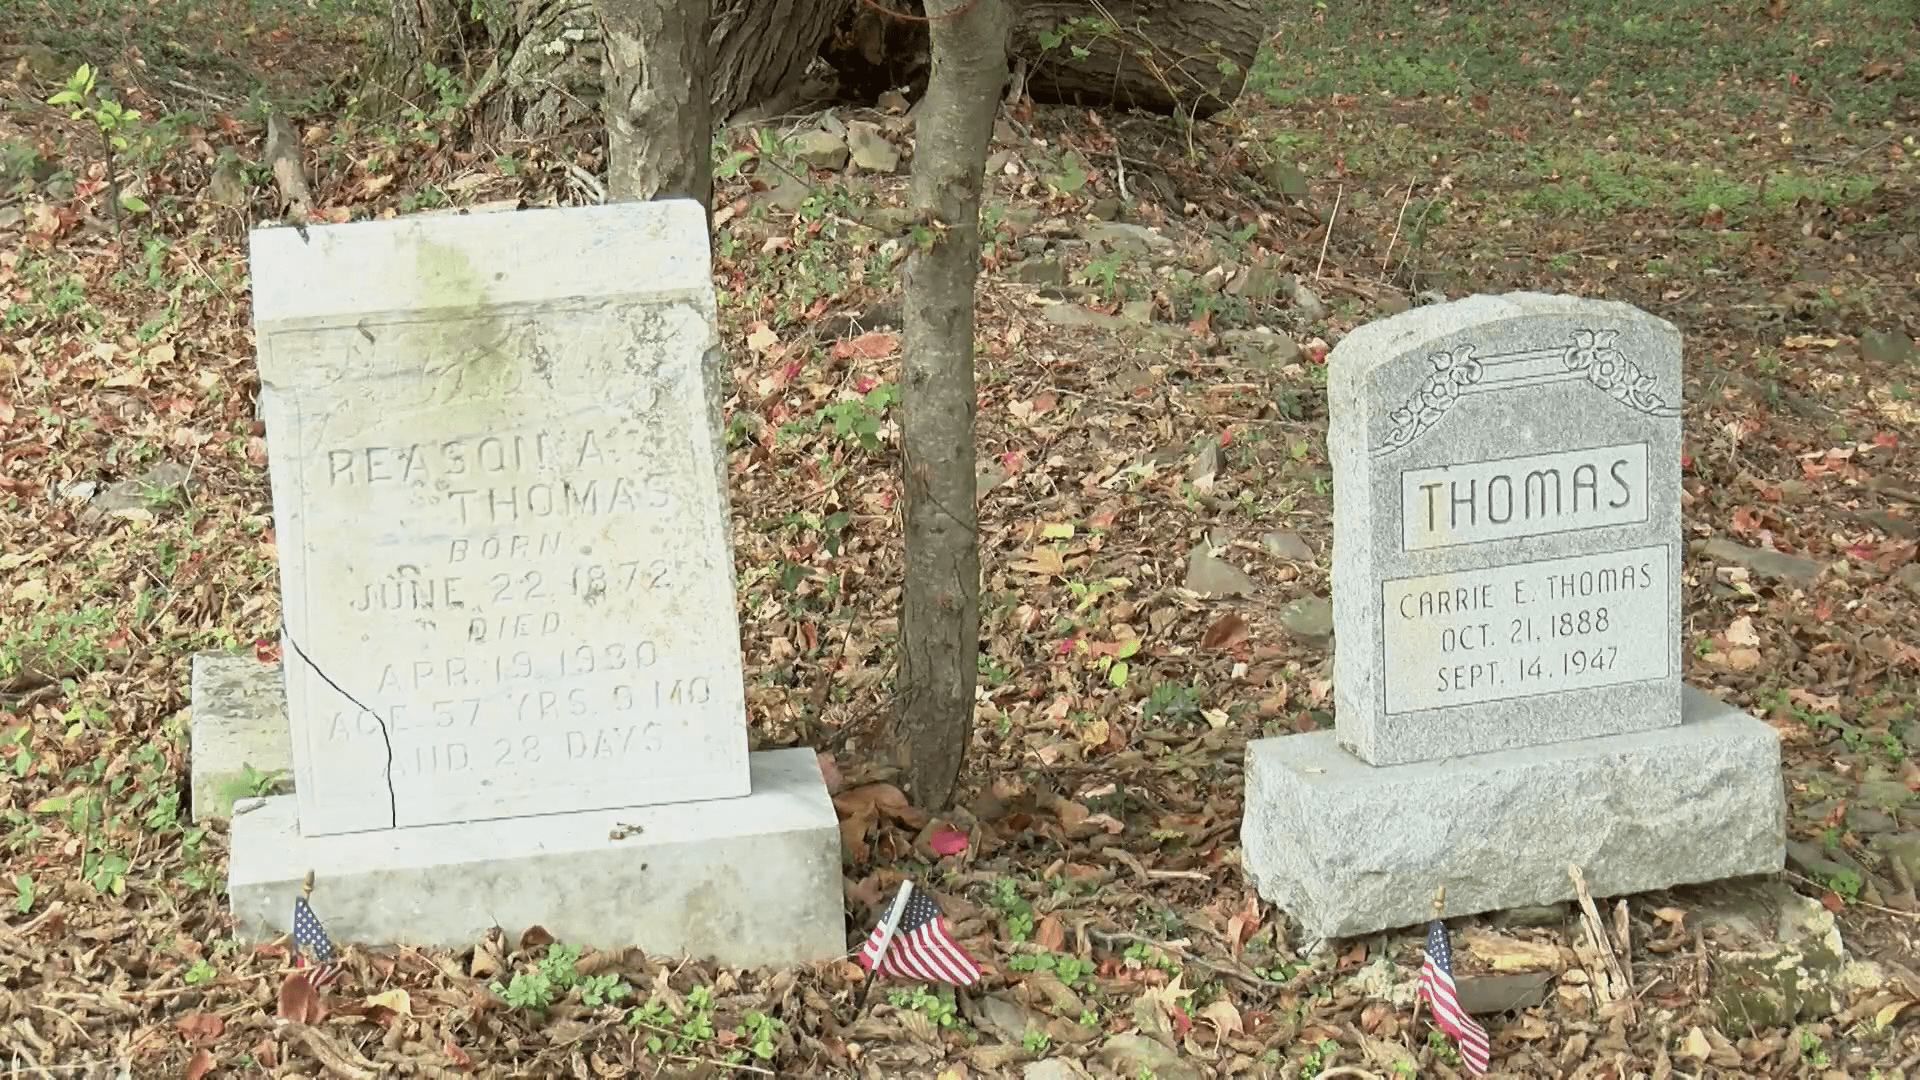 Grave markers at Red Hill Cemetery